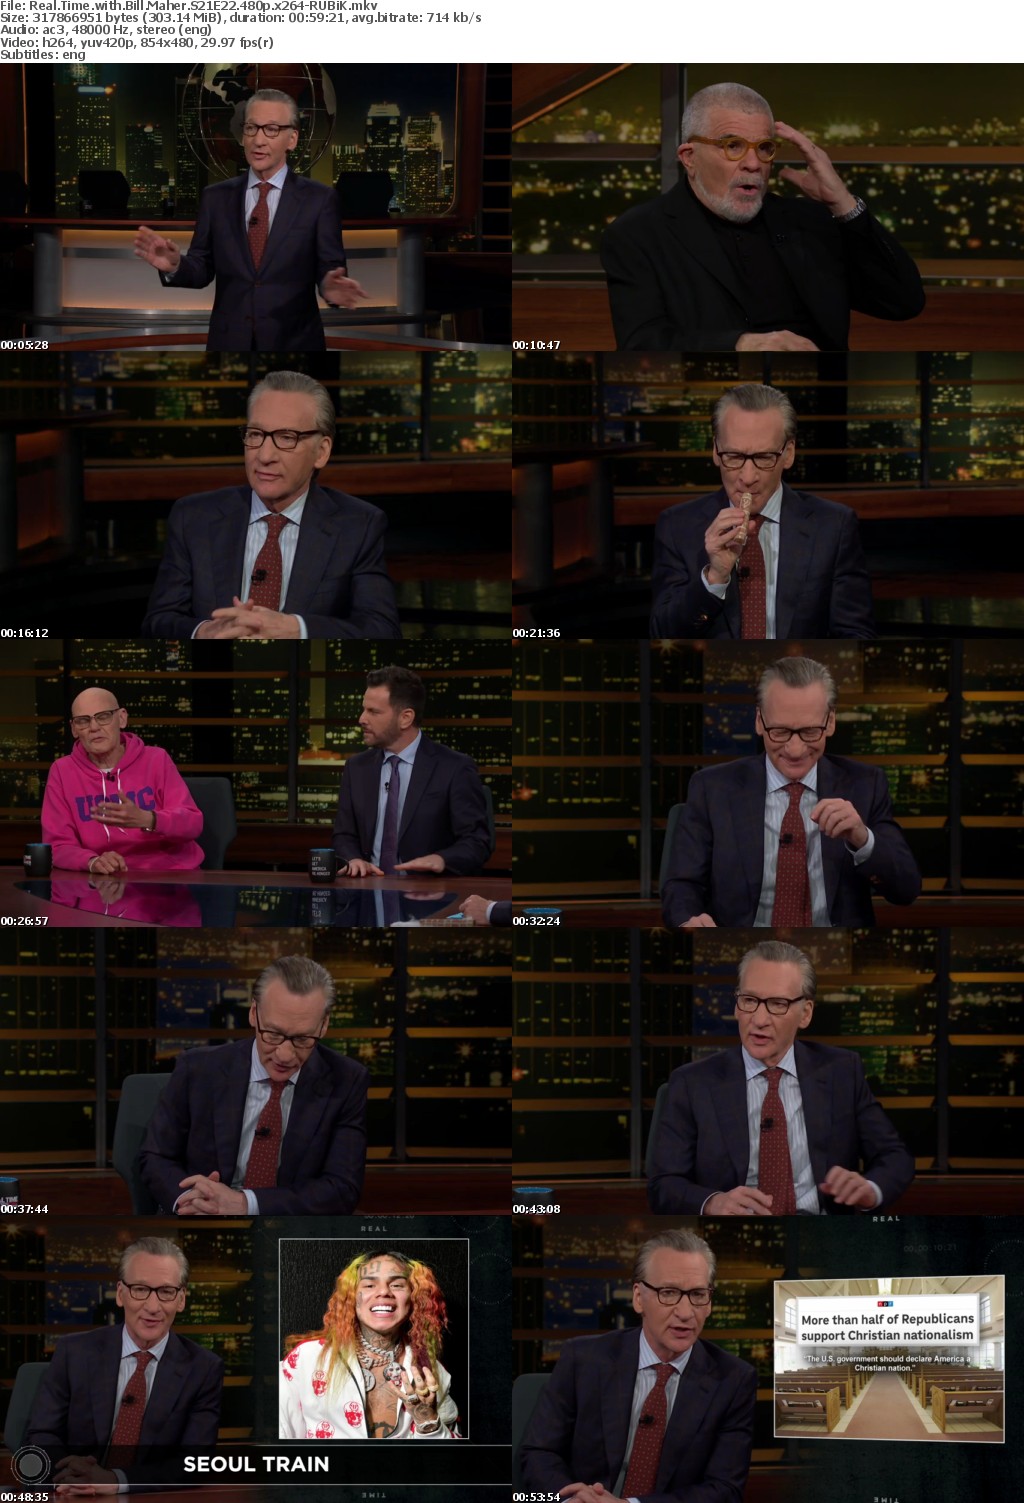 Real Time with Bill Maher S21E22 480p x264-RUBiK